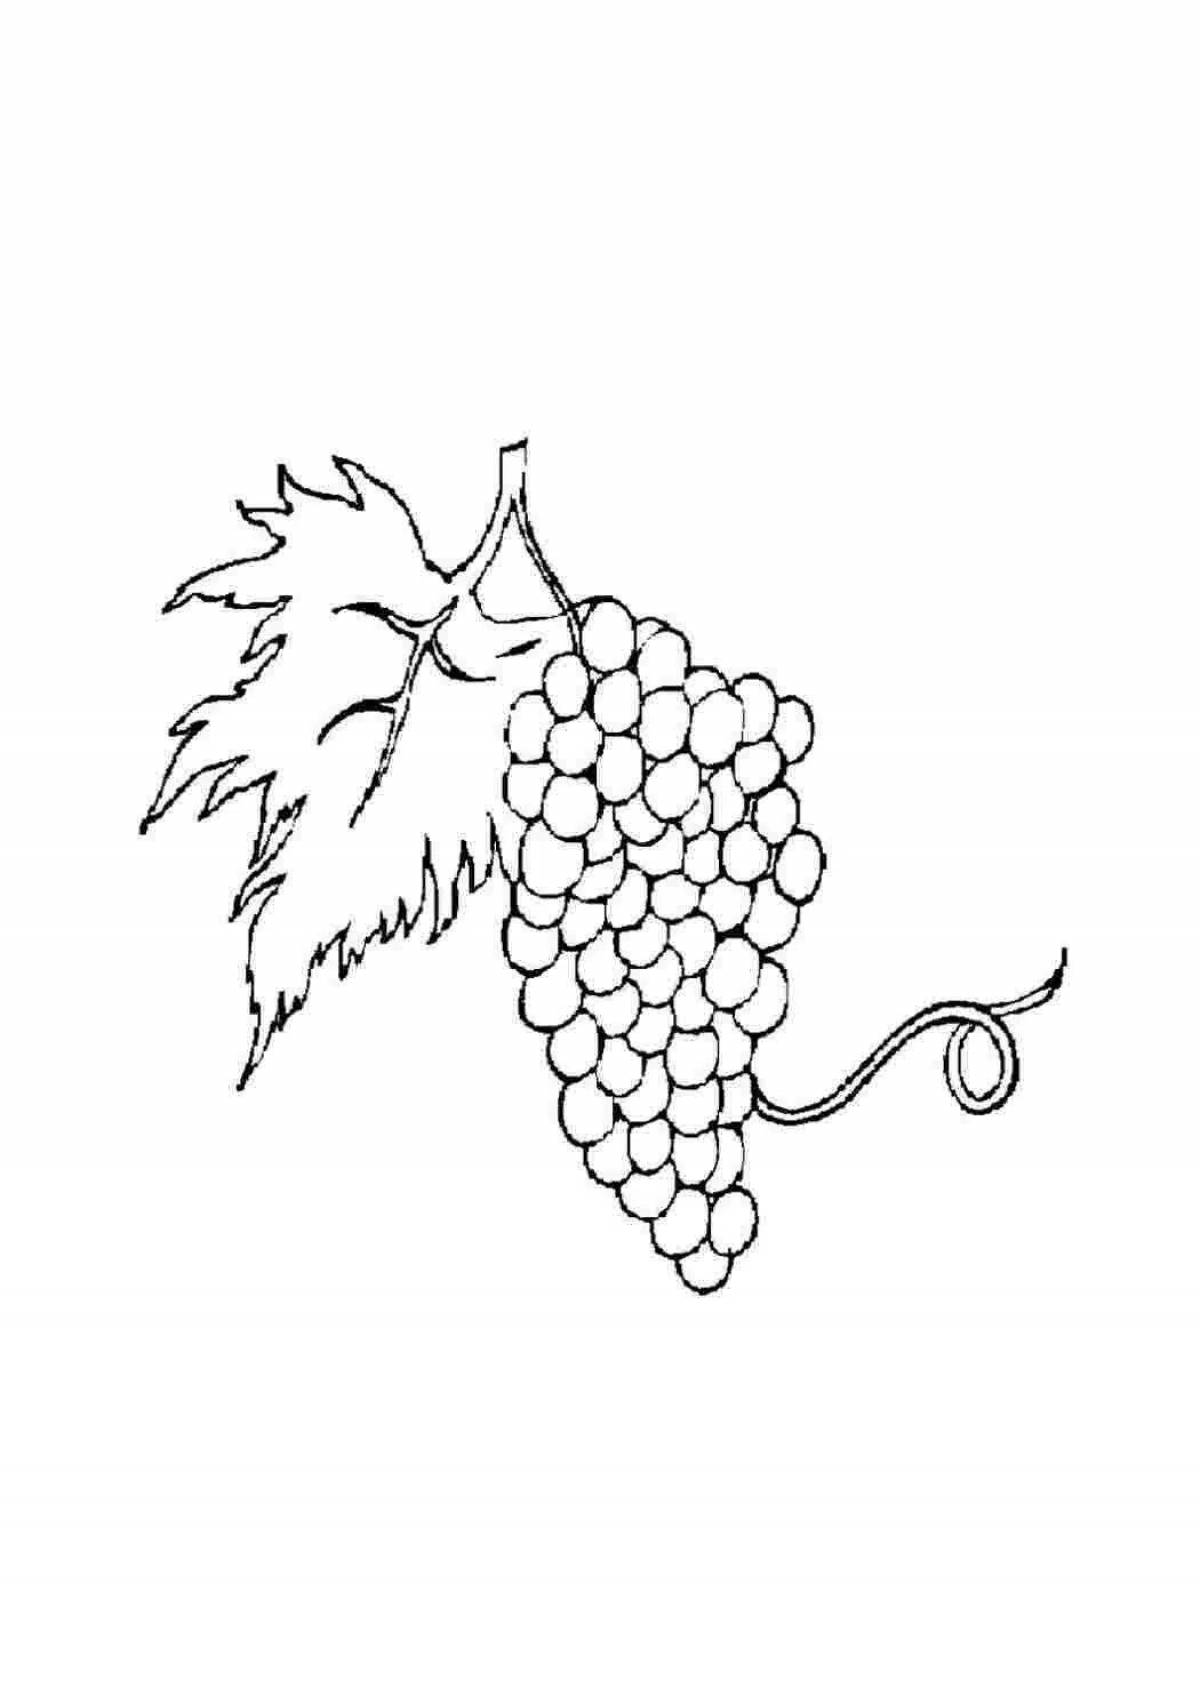 Pre-k glossy grapes coloring page